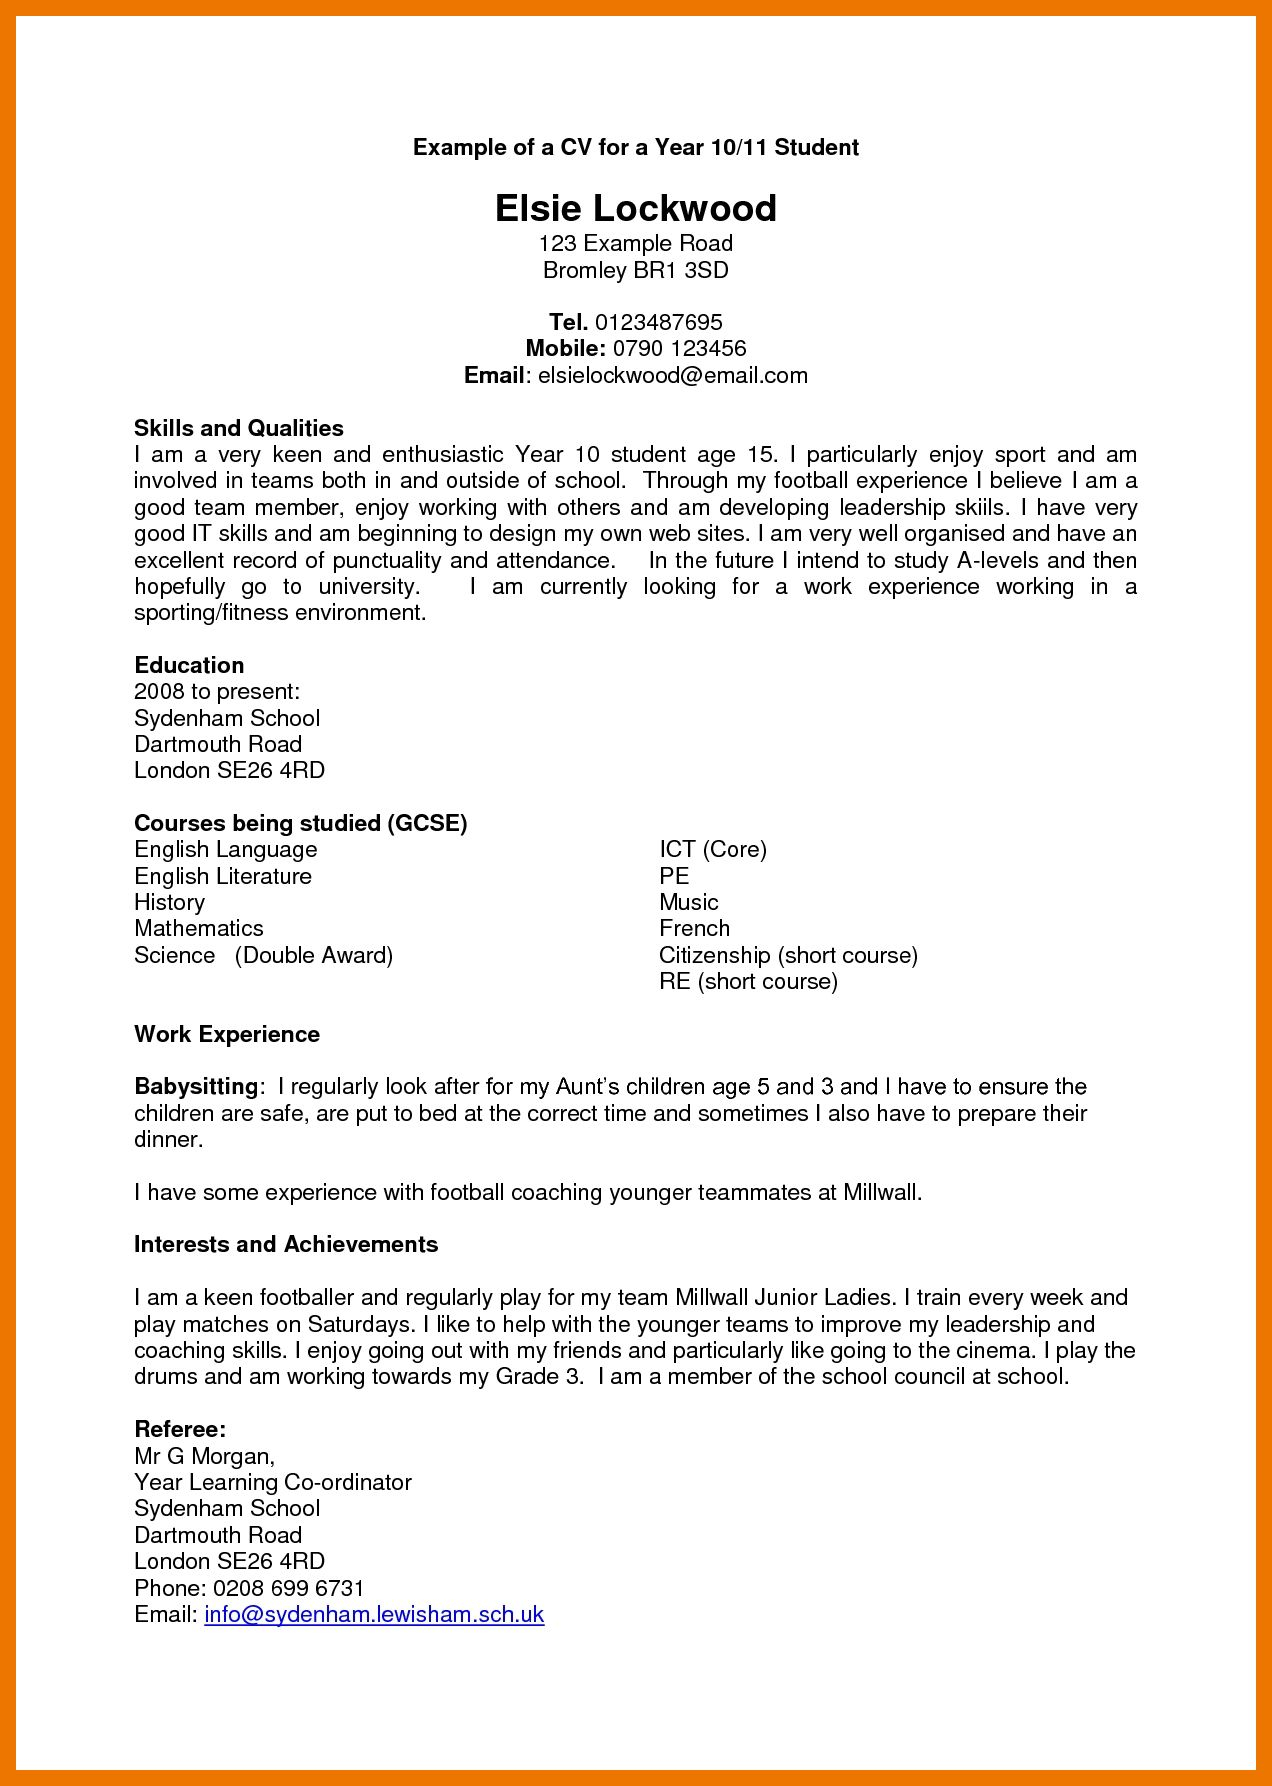 Cv Template For Year 11 Students Debandje within size 1272 X 1786